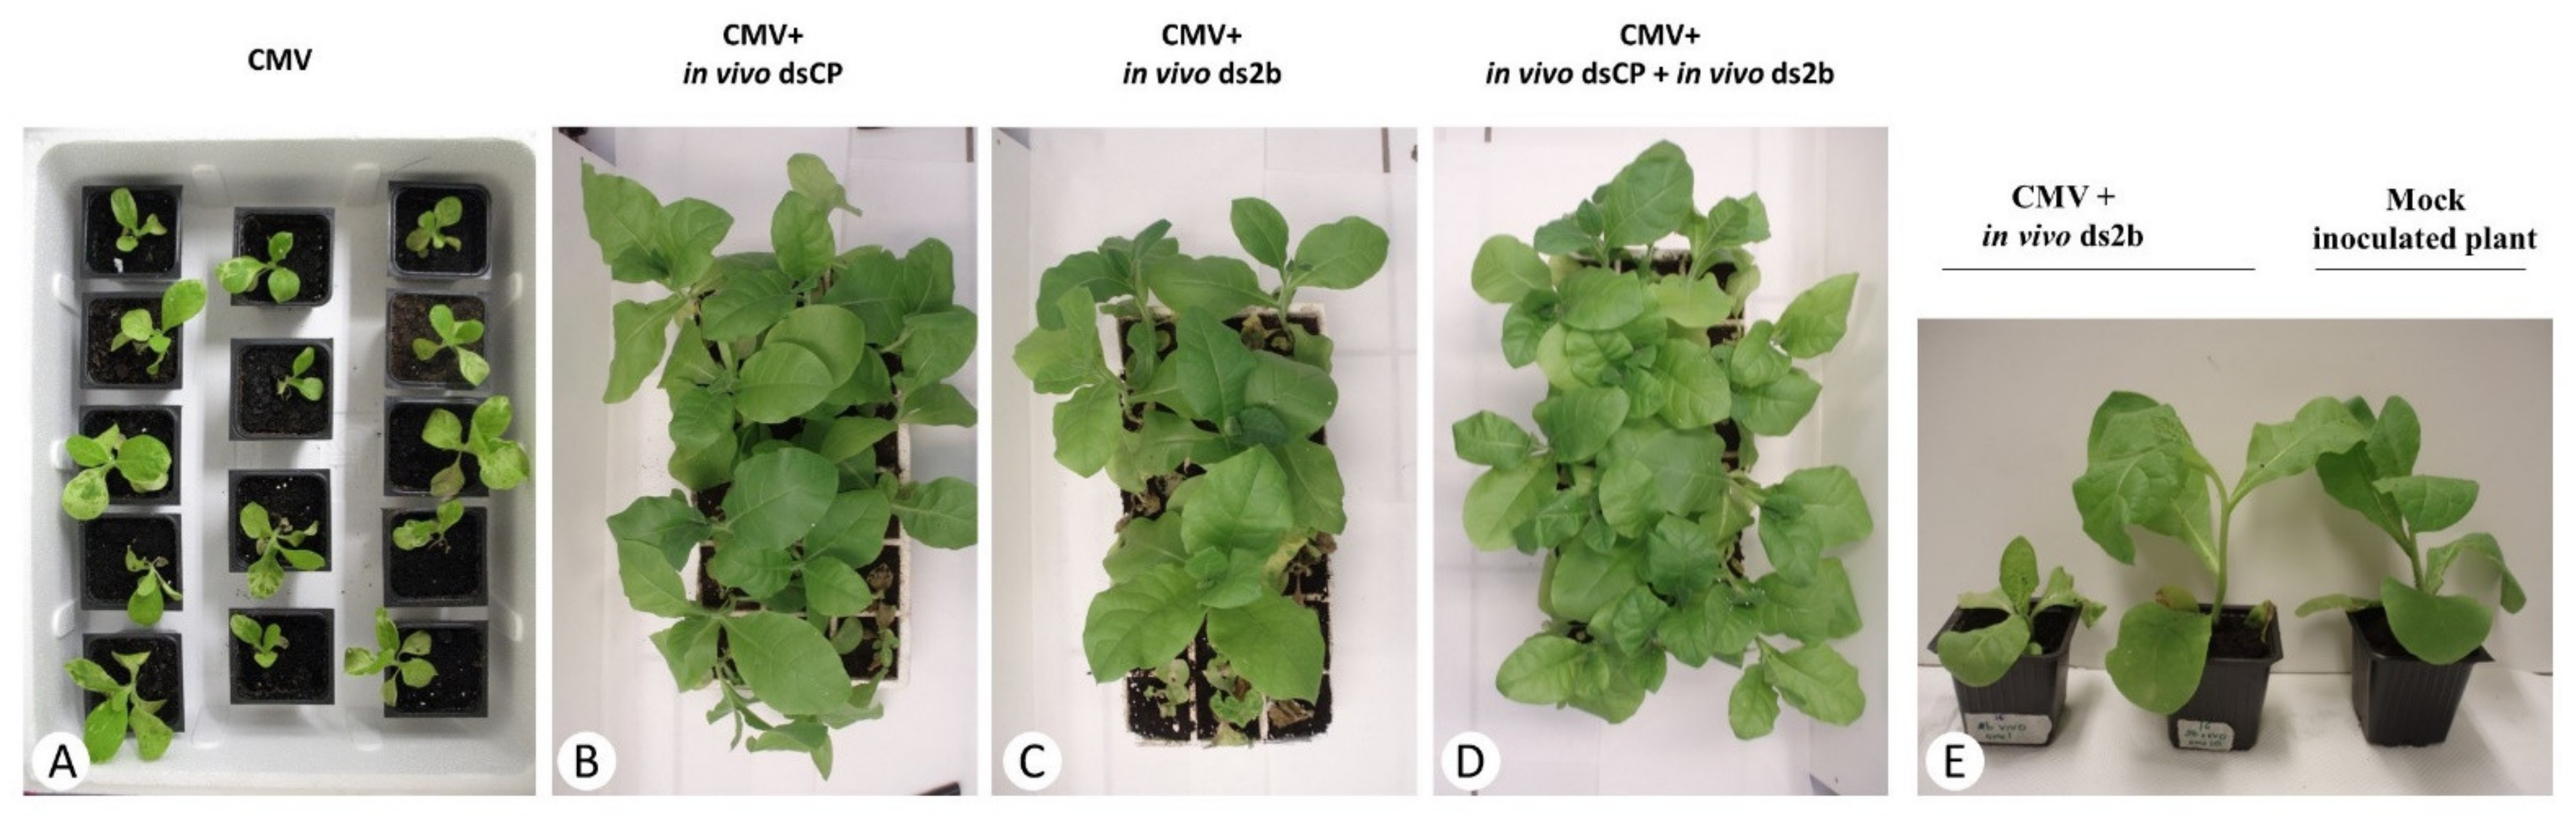 Plants Free Full Text Topical Application Of Double Stranded Rna Targeting 2b And Cp Genes Of Cucumber Mosaic Virus Protects Plants Against Local And Systemic Viral Infection Html